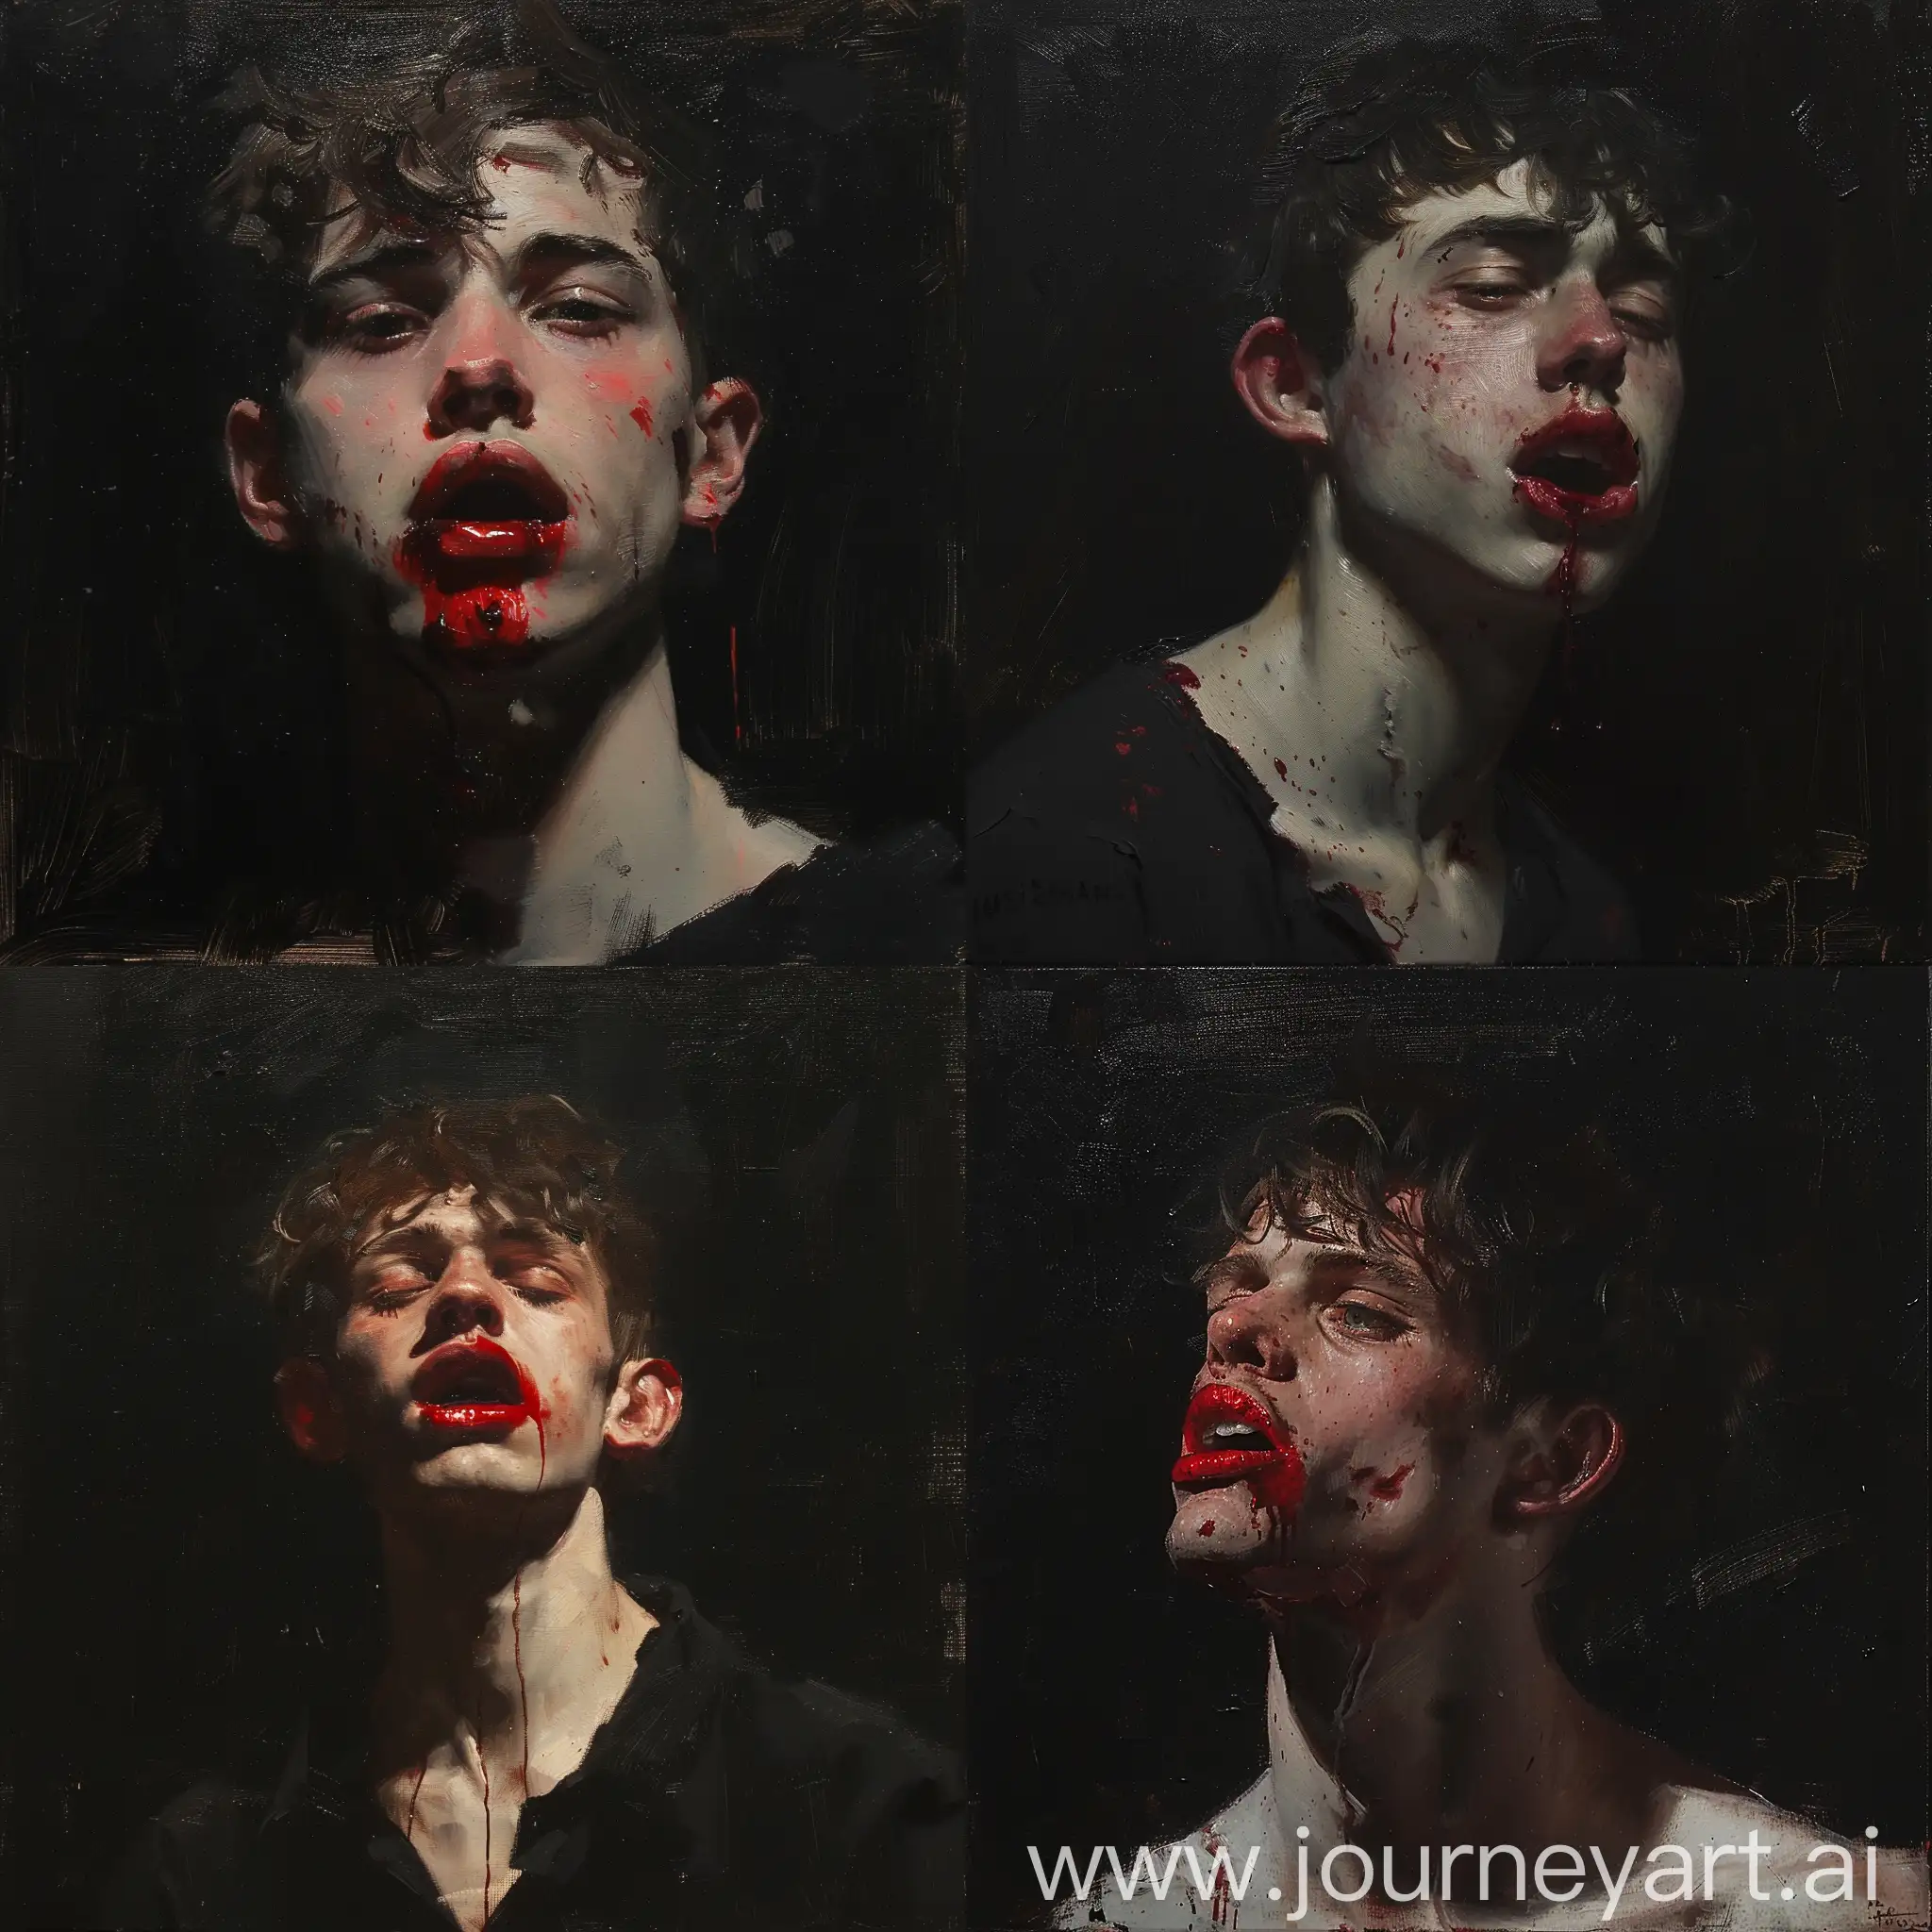 Realistic-Portrait-Painting-of-a-Young-Man-with-Bloody-Mouth-on-Dark-Background